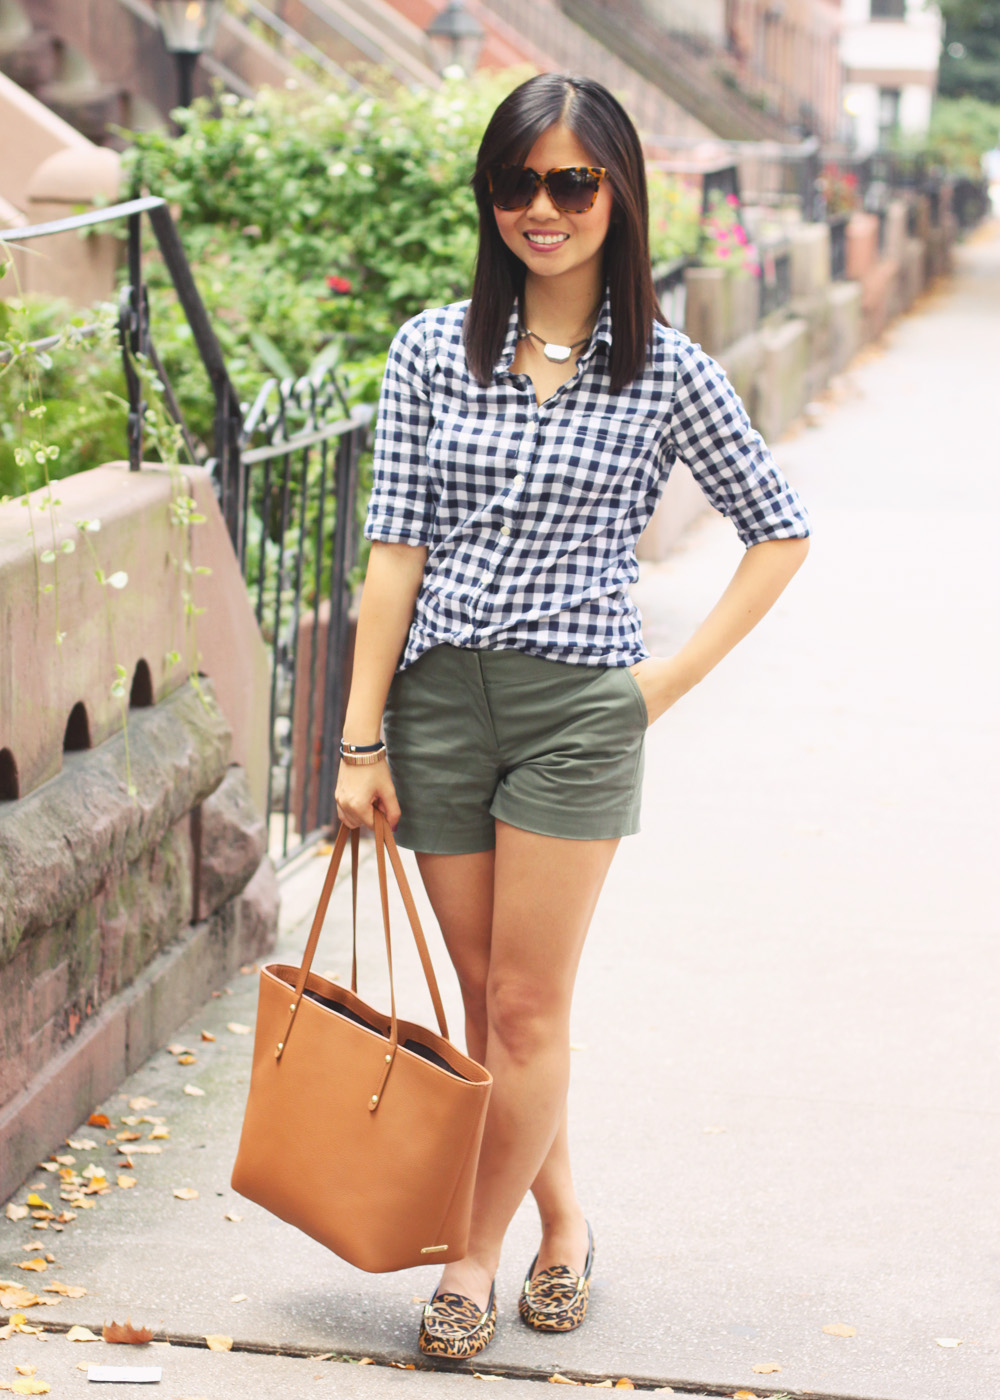 Skirt The Rules Blog; NYC fashion blogger; style blog; how to wear gingham in the fall; J.Crew navy gingham button up shirt; J.Crew olive 3" shorts; BaubleBar bronze geometric necklace; Gigi New York Taylor pebble leather tote; zeroUV designer inspired sunglasses; JewelMint leather wrap bracelet; Joie Dylan leopard loafers